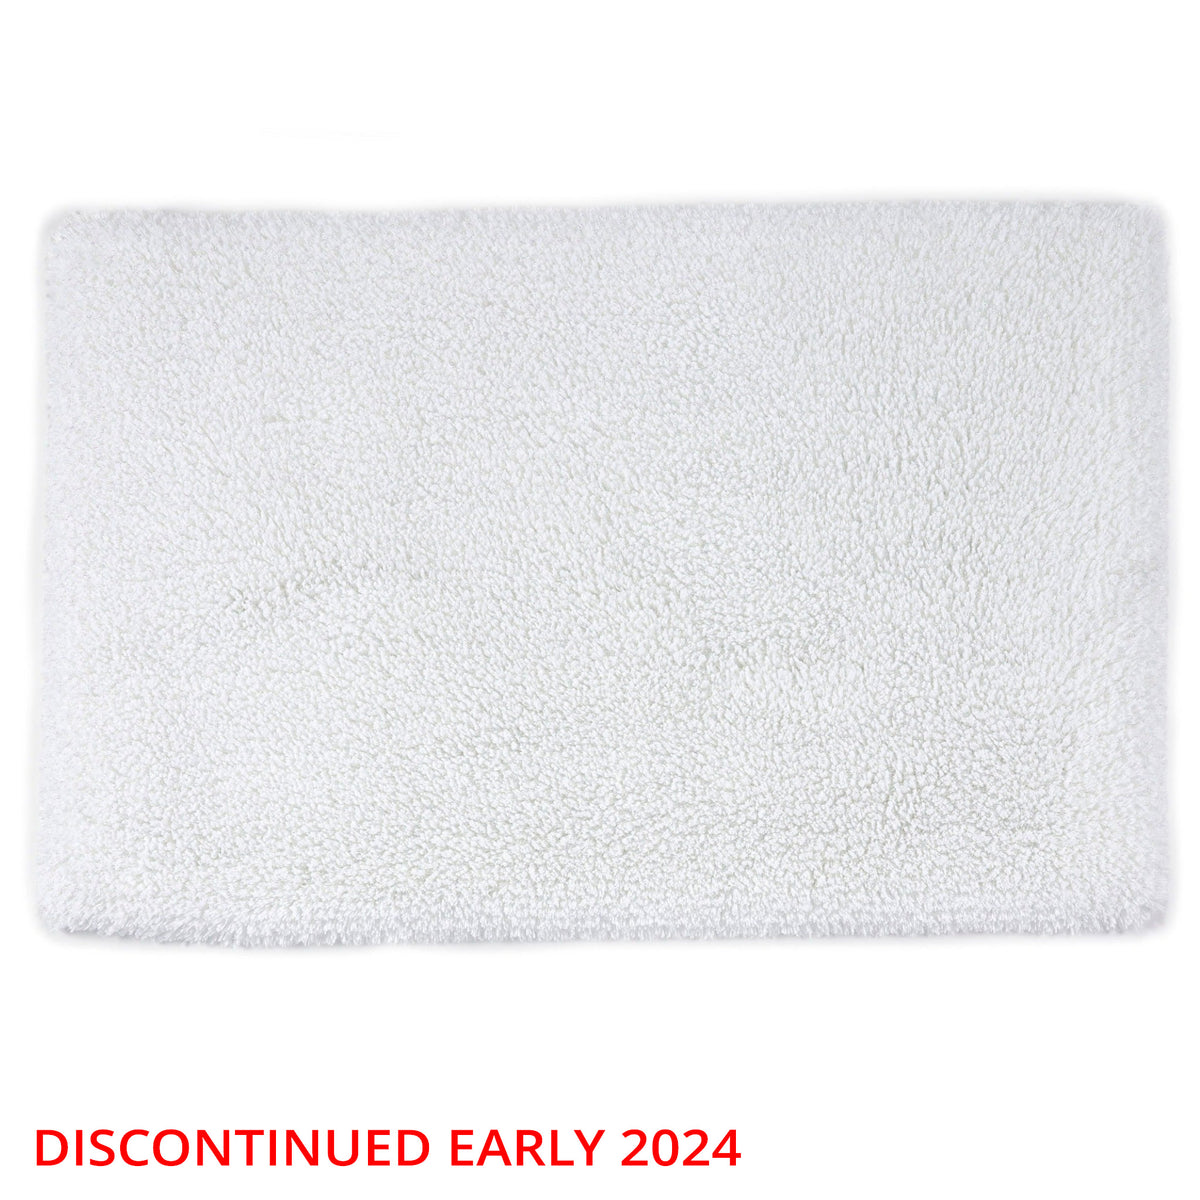 Abyss Habidecor Elysee Bath and Area Rugs - White